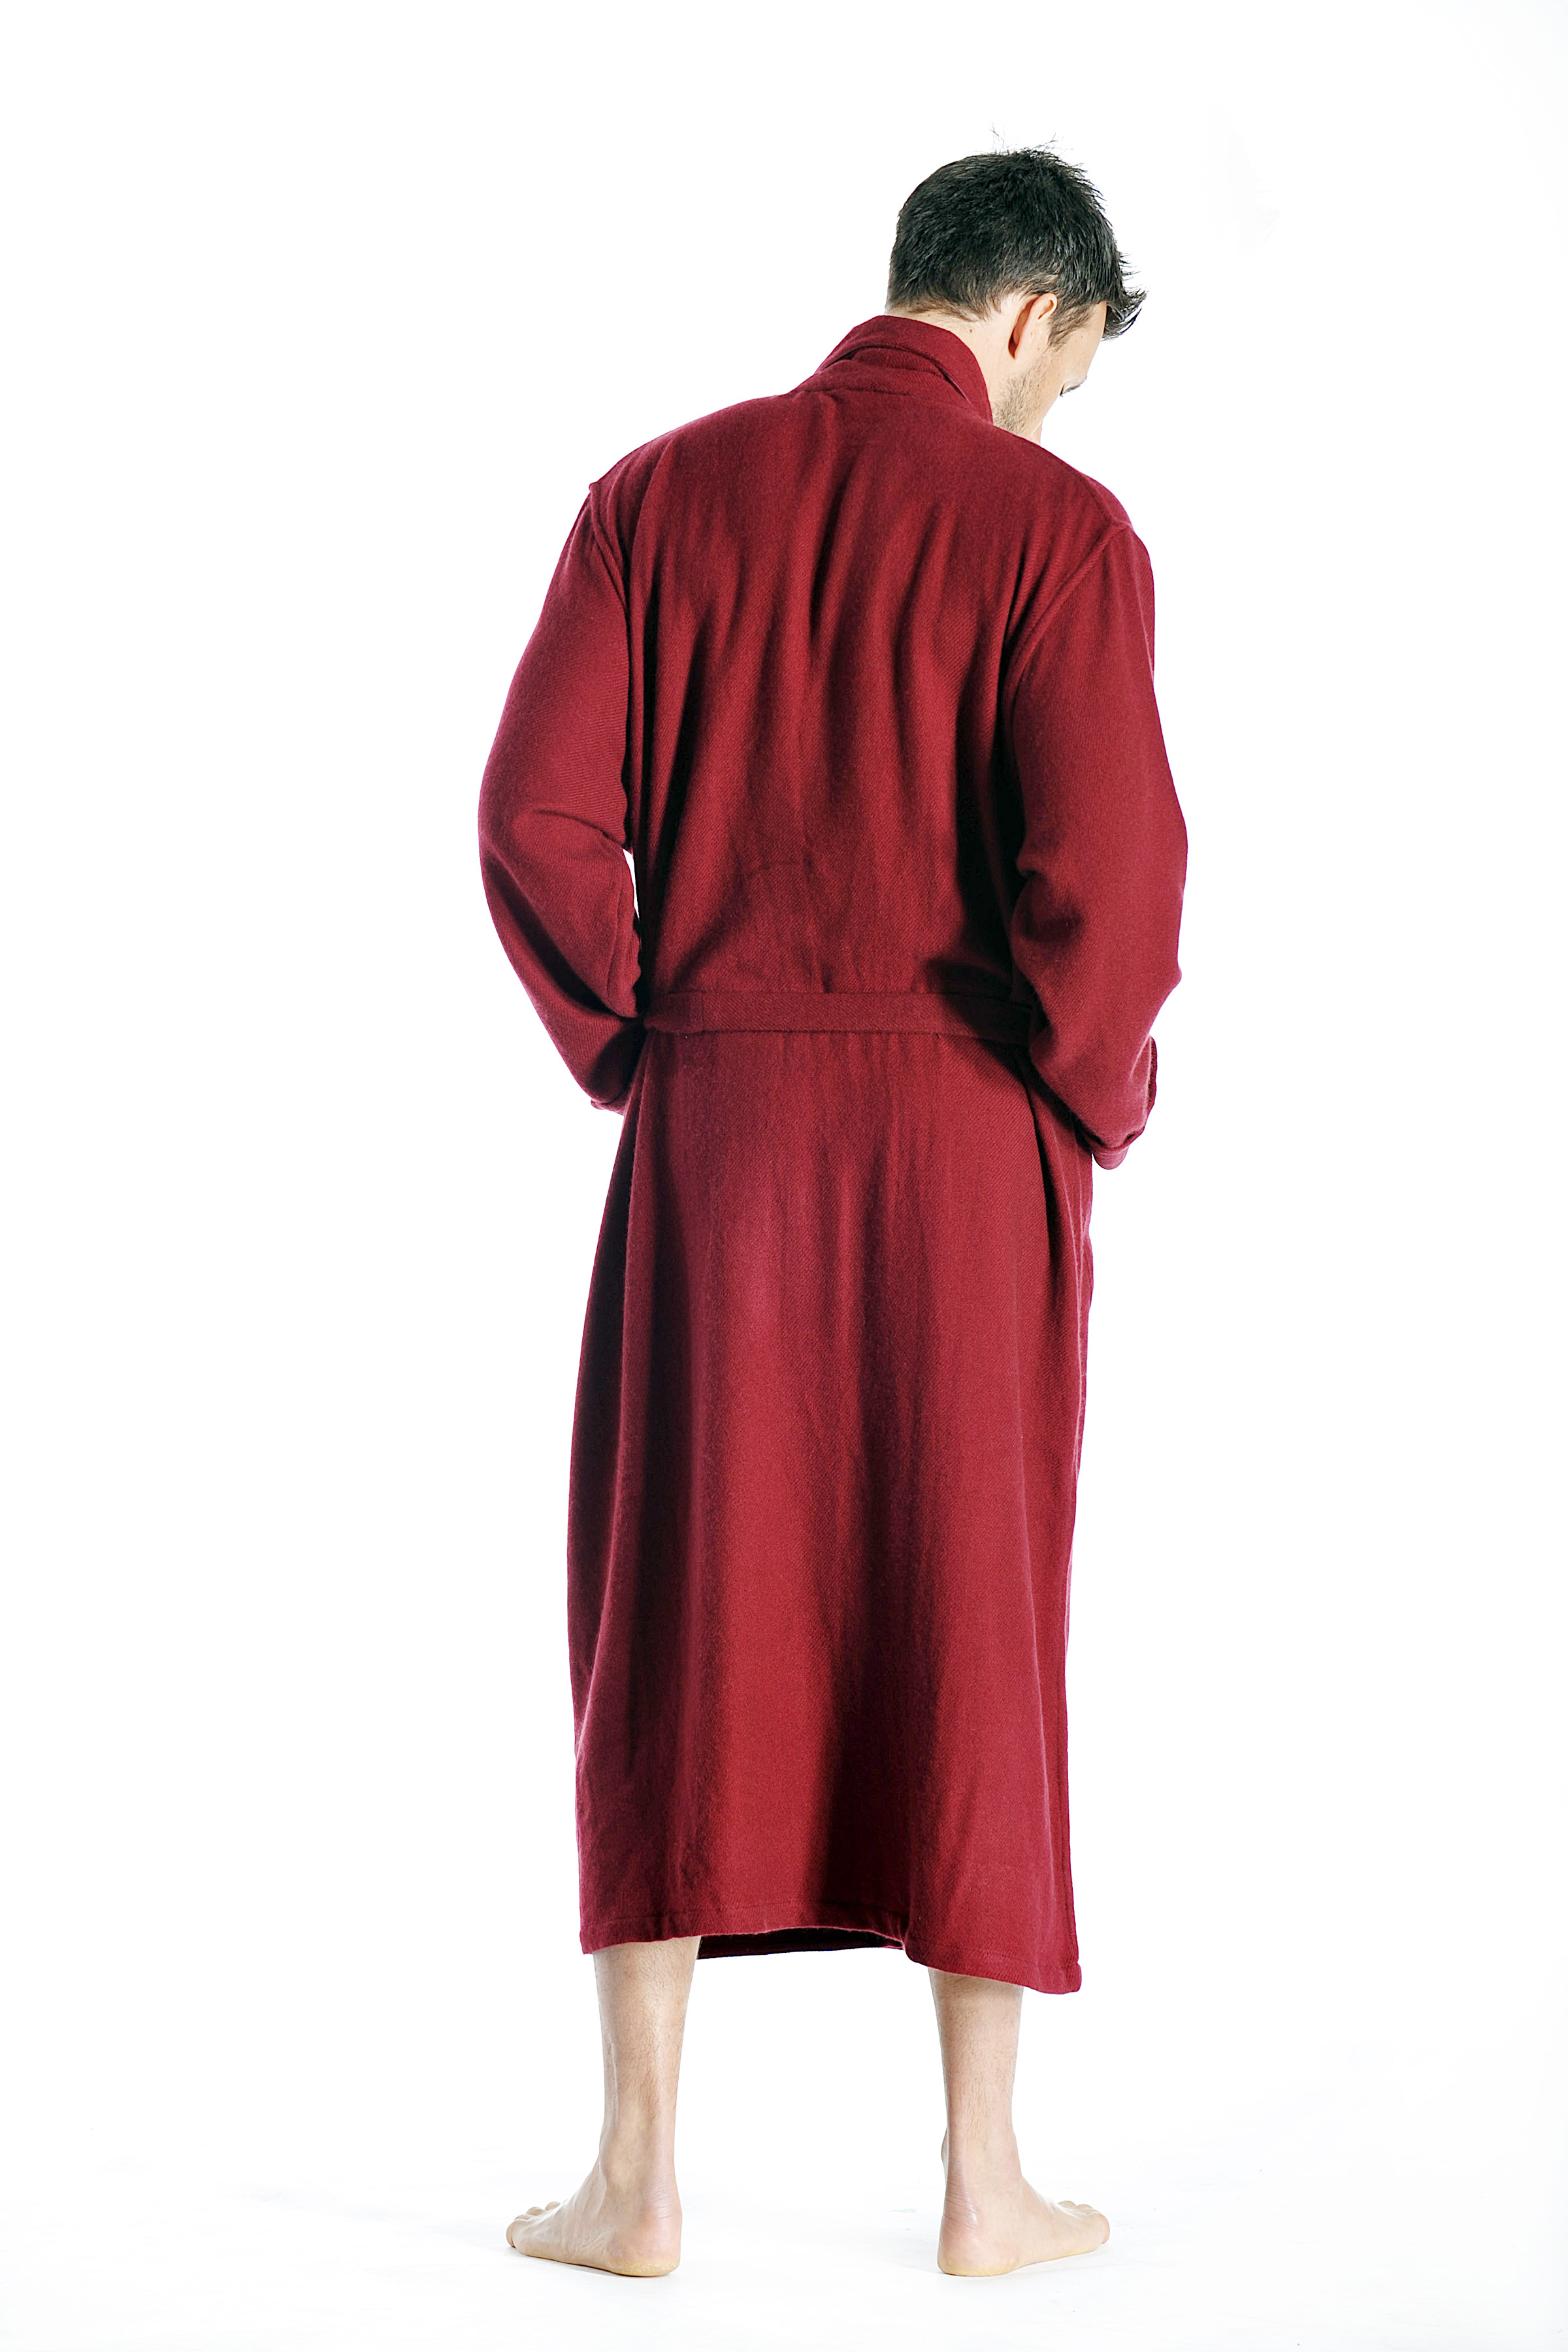 Pure Cashmere Full Length Robe for Men (Faded Pewter, Small/Medium)